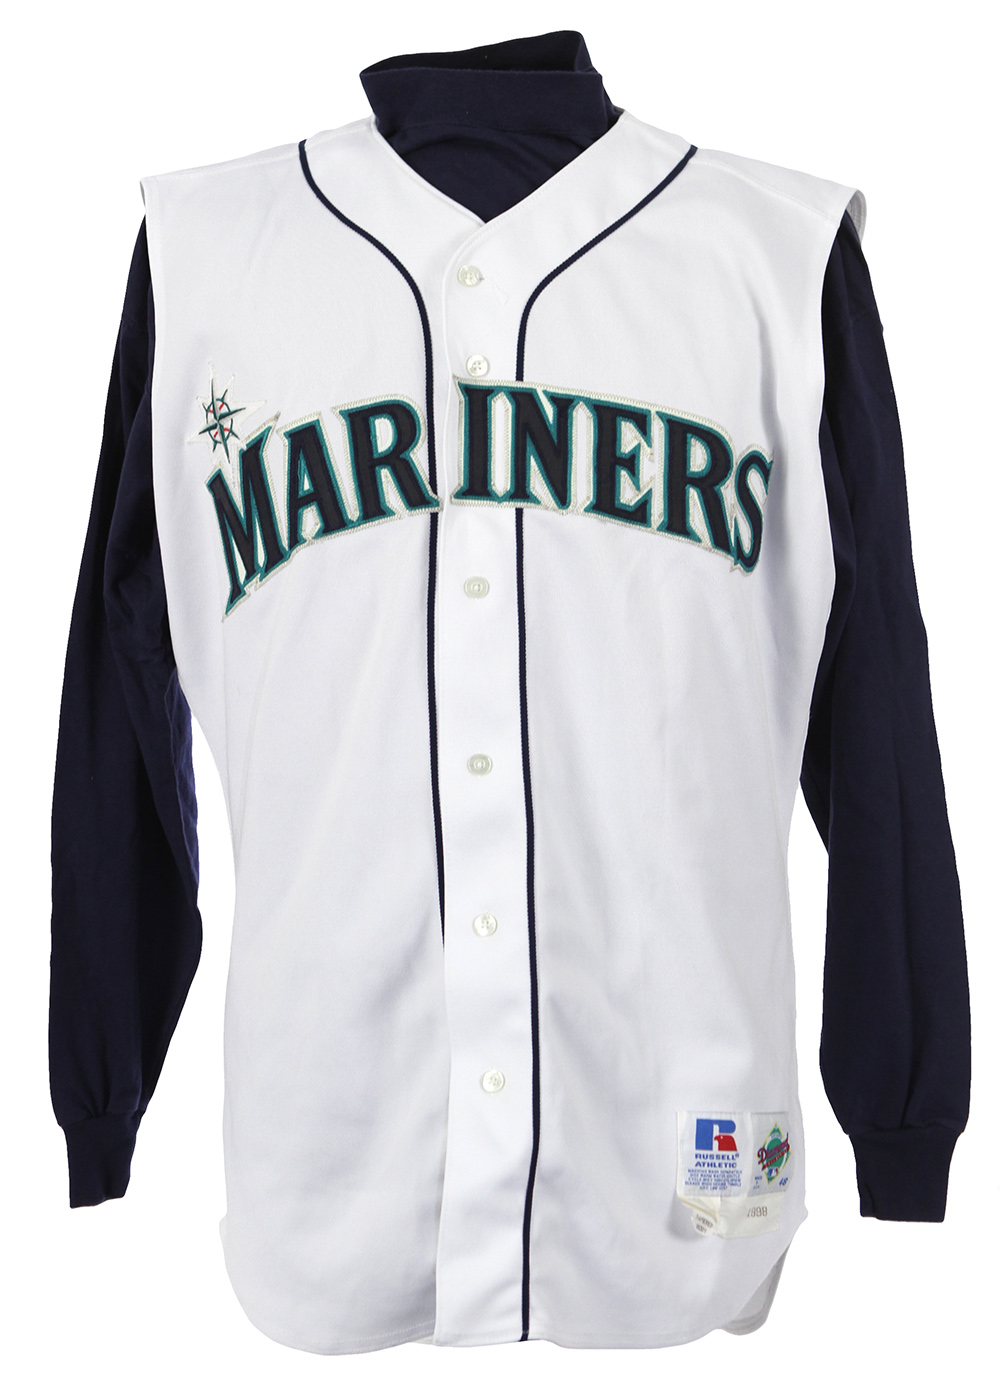 Alex Rodriguez Signed Mariners Game-Used Jersey Inscribed Game